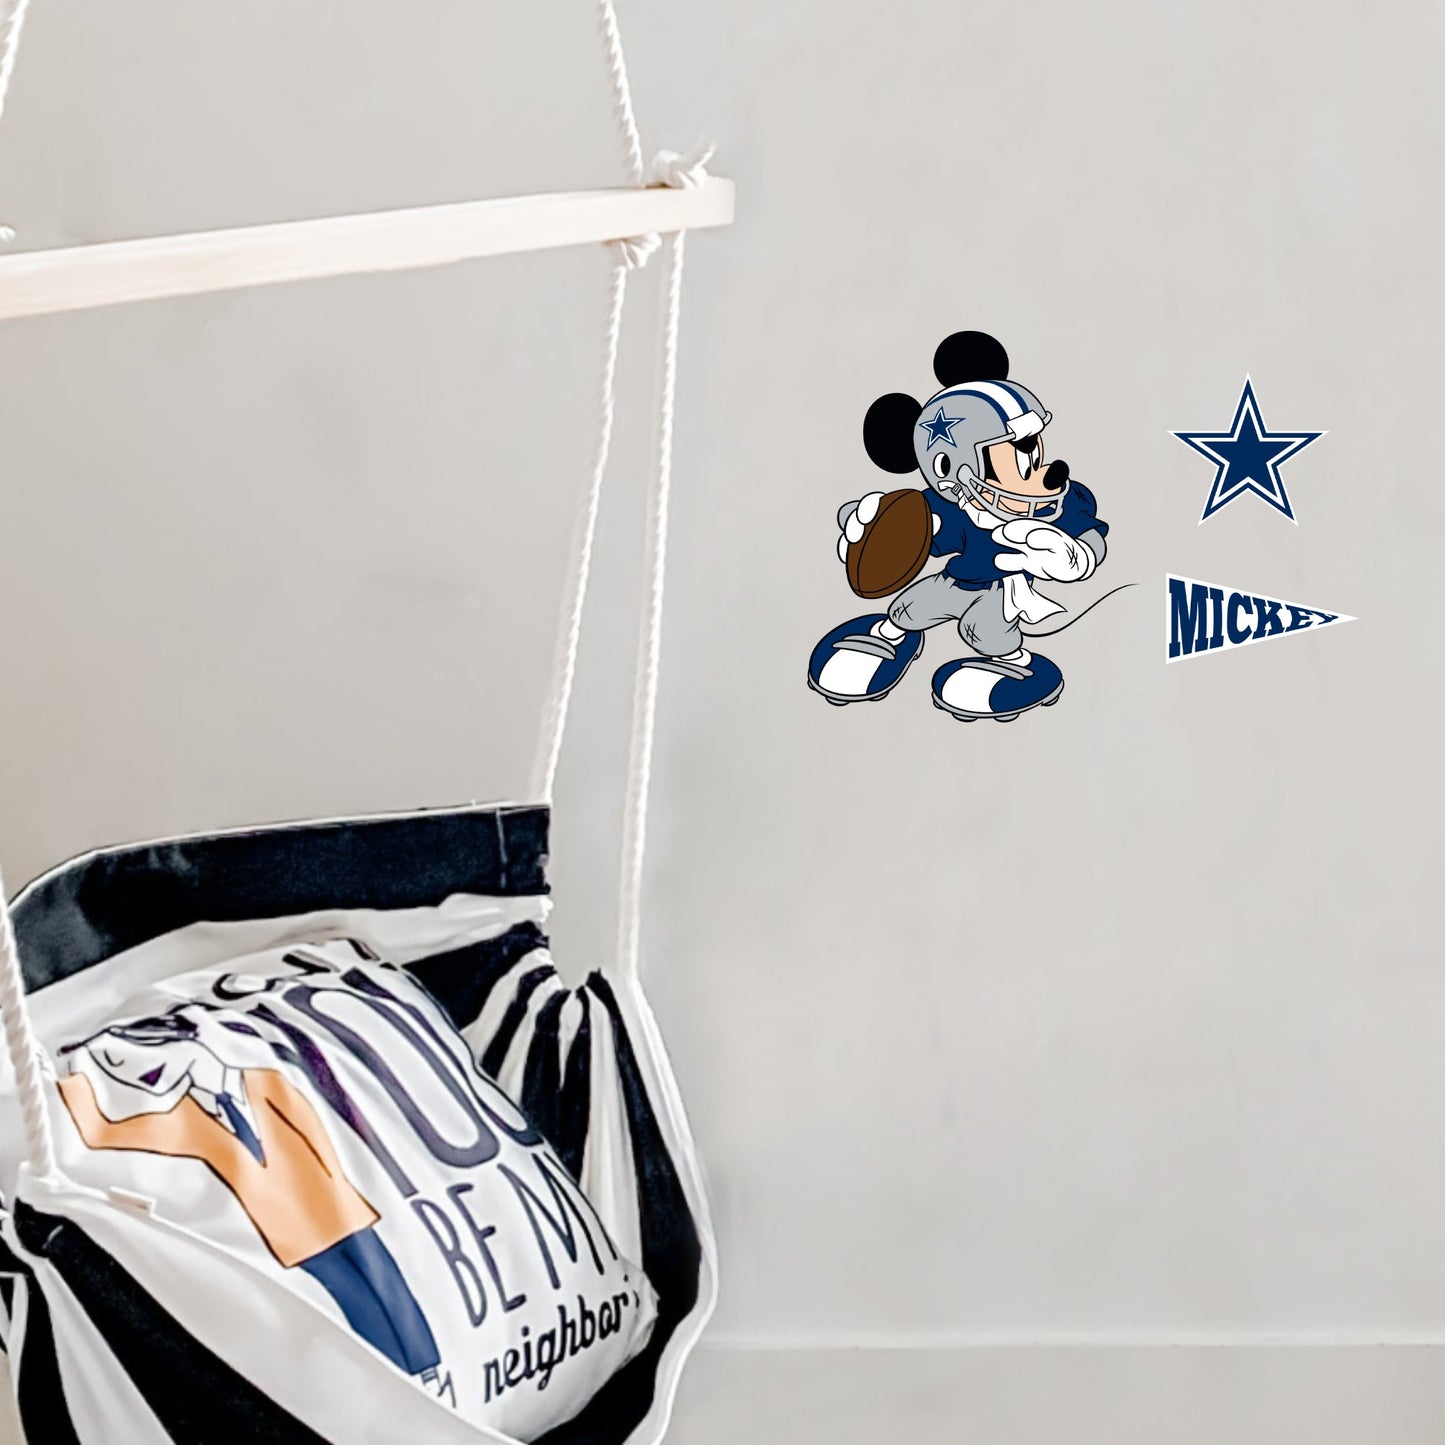 Dallas Cowboys: Mickey Mouse - Officially Licensed NFL Removable Adhesive Decal